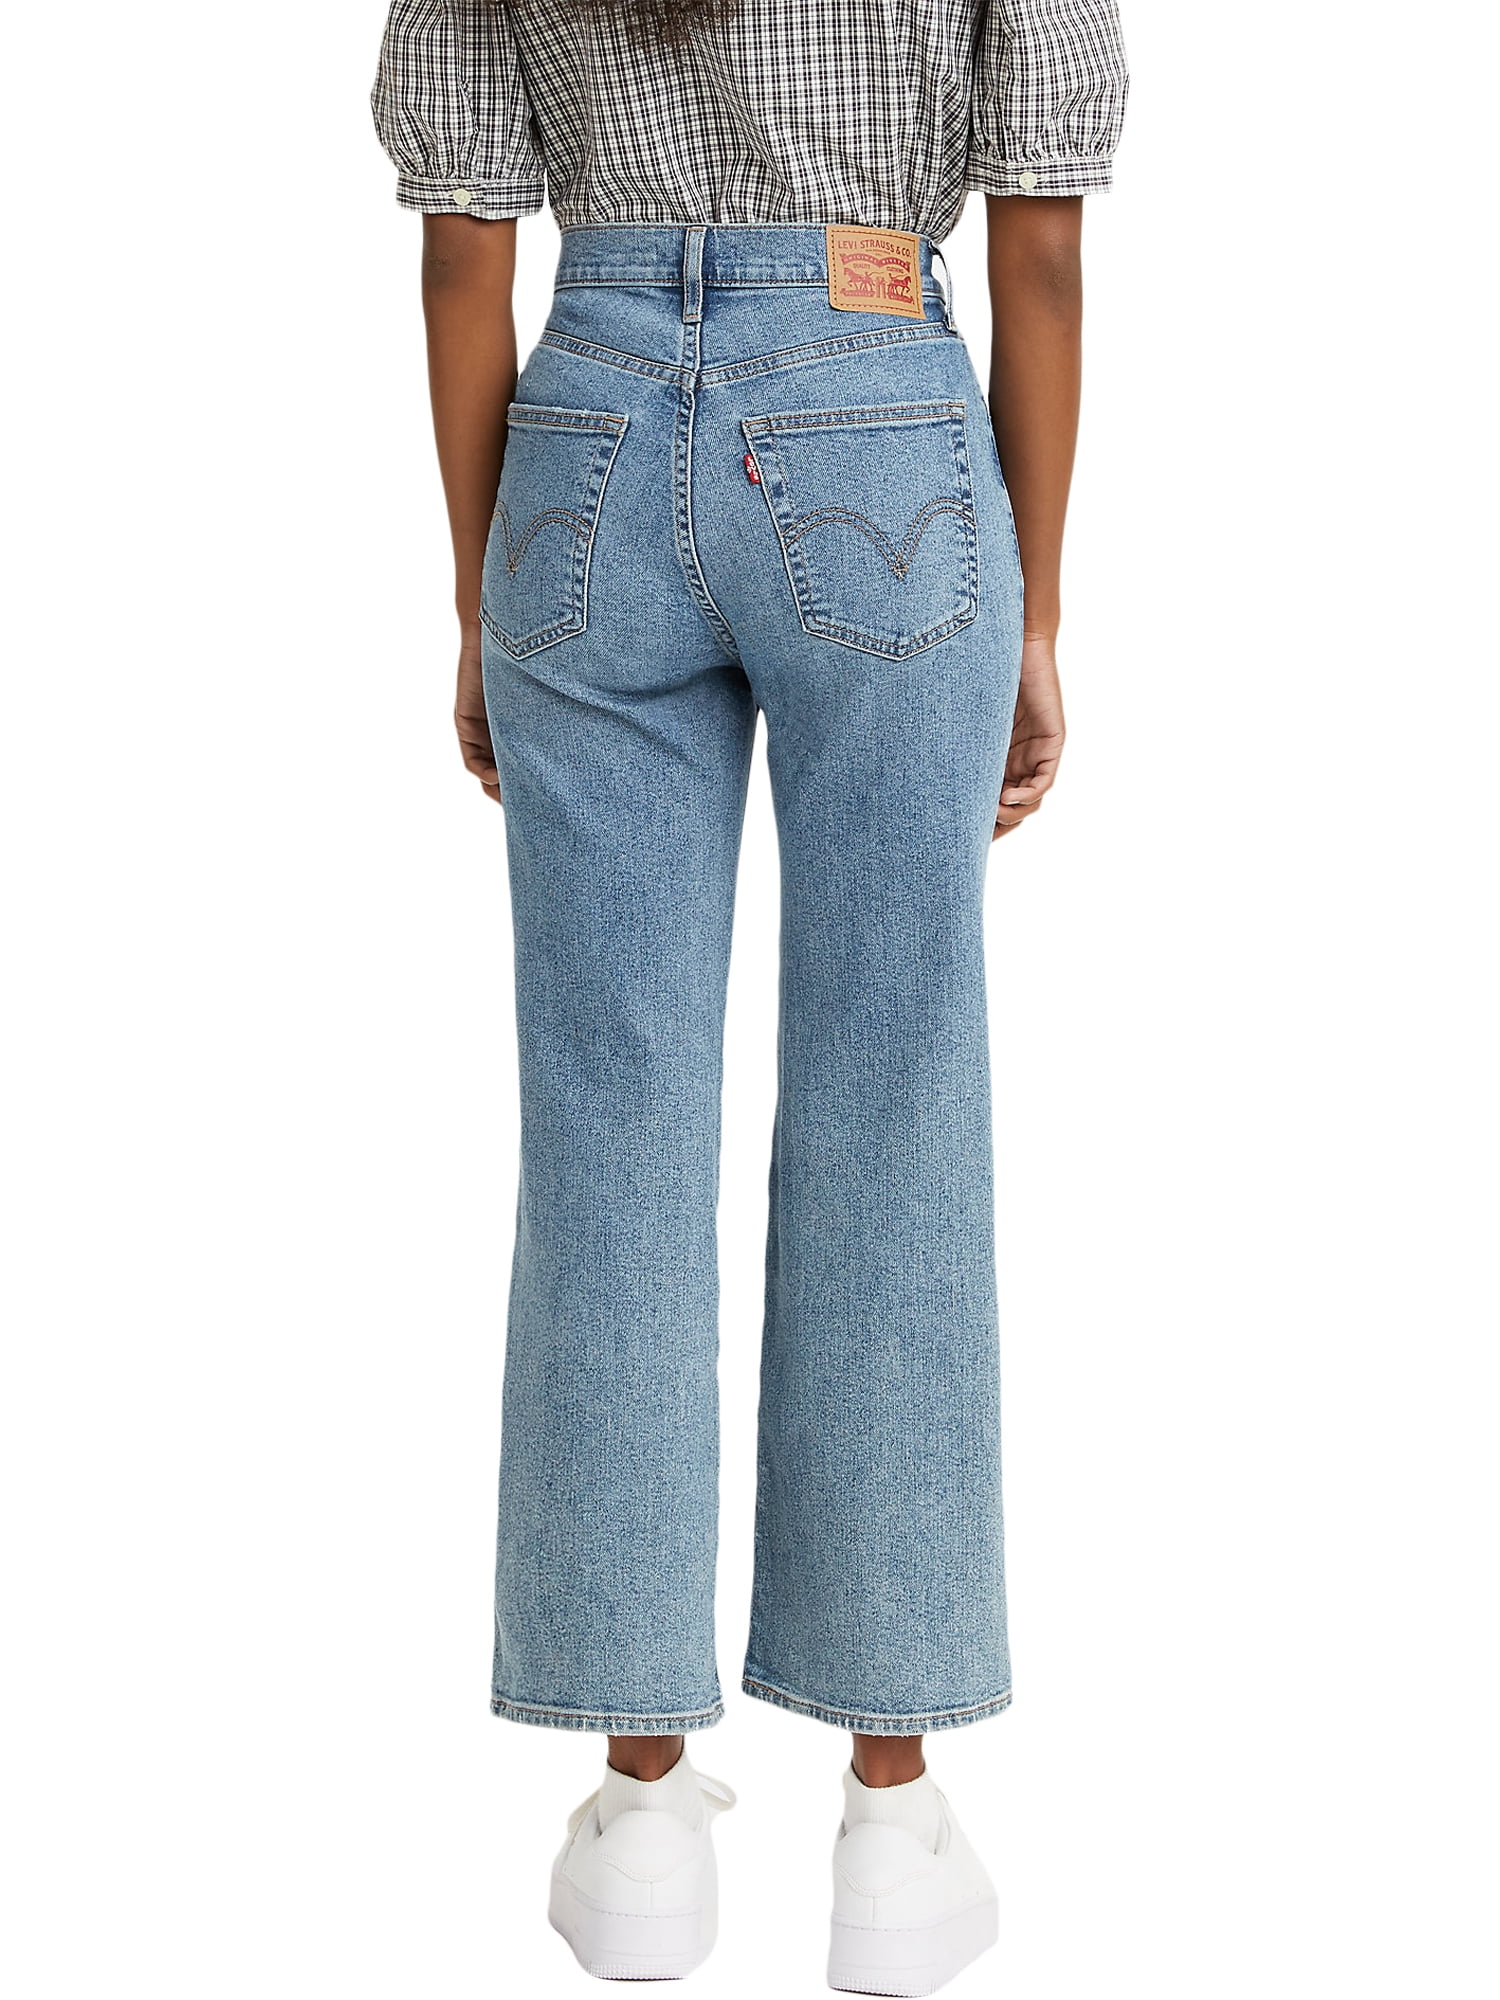 Levi's Women's High Waisted Cropped Flare Jeans 